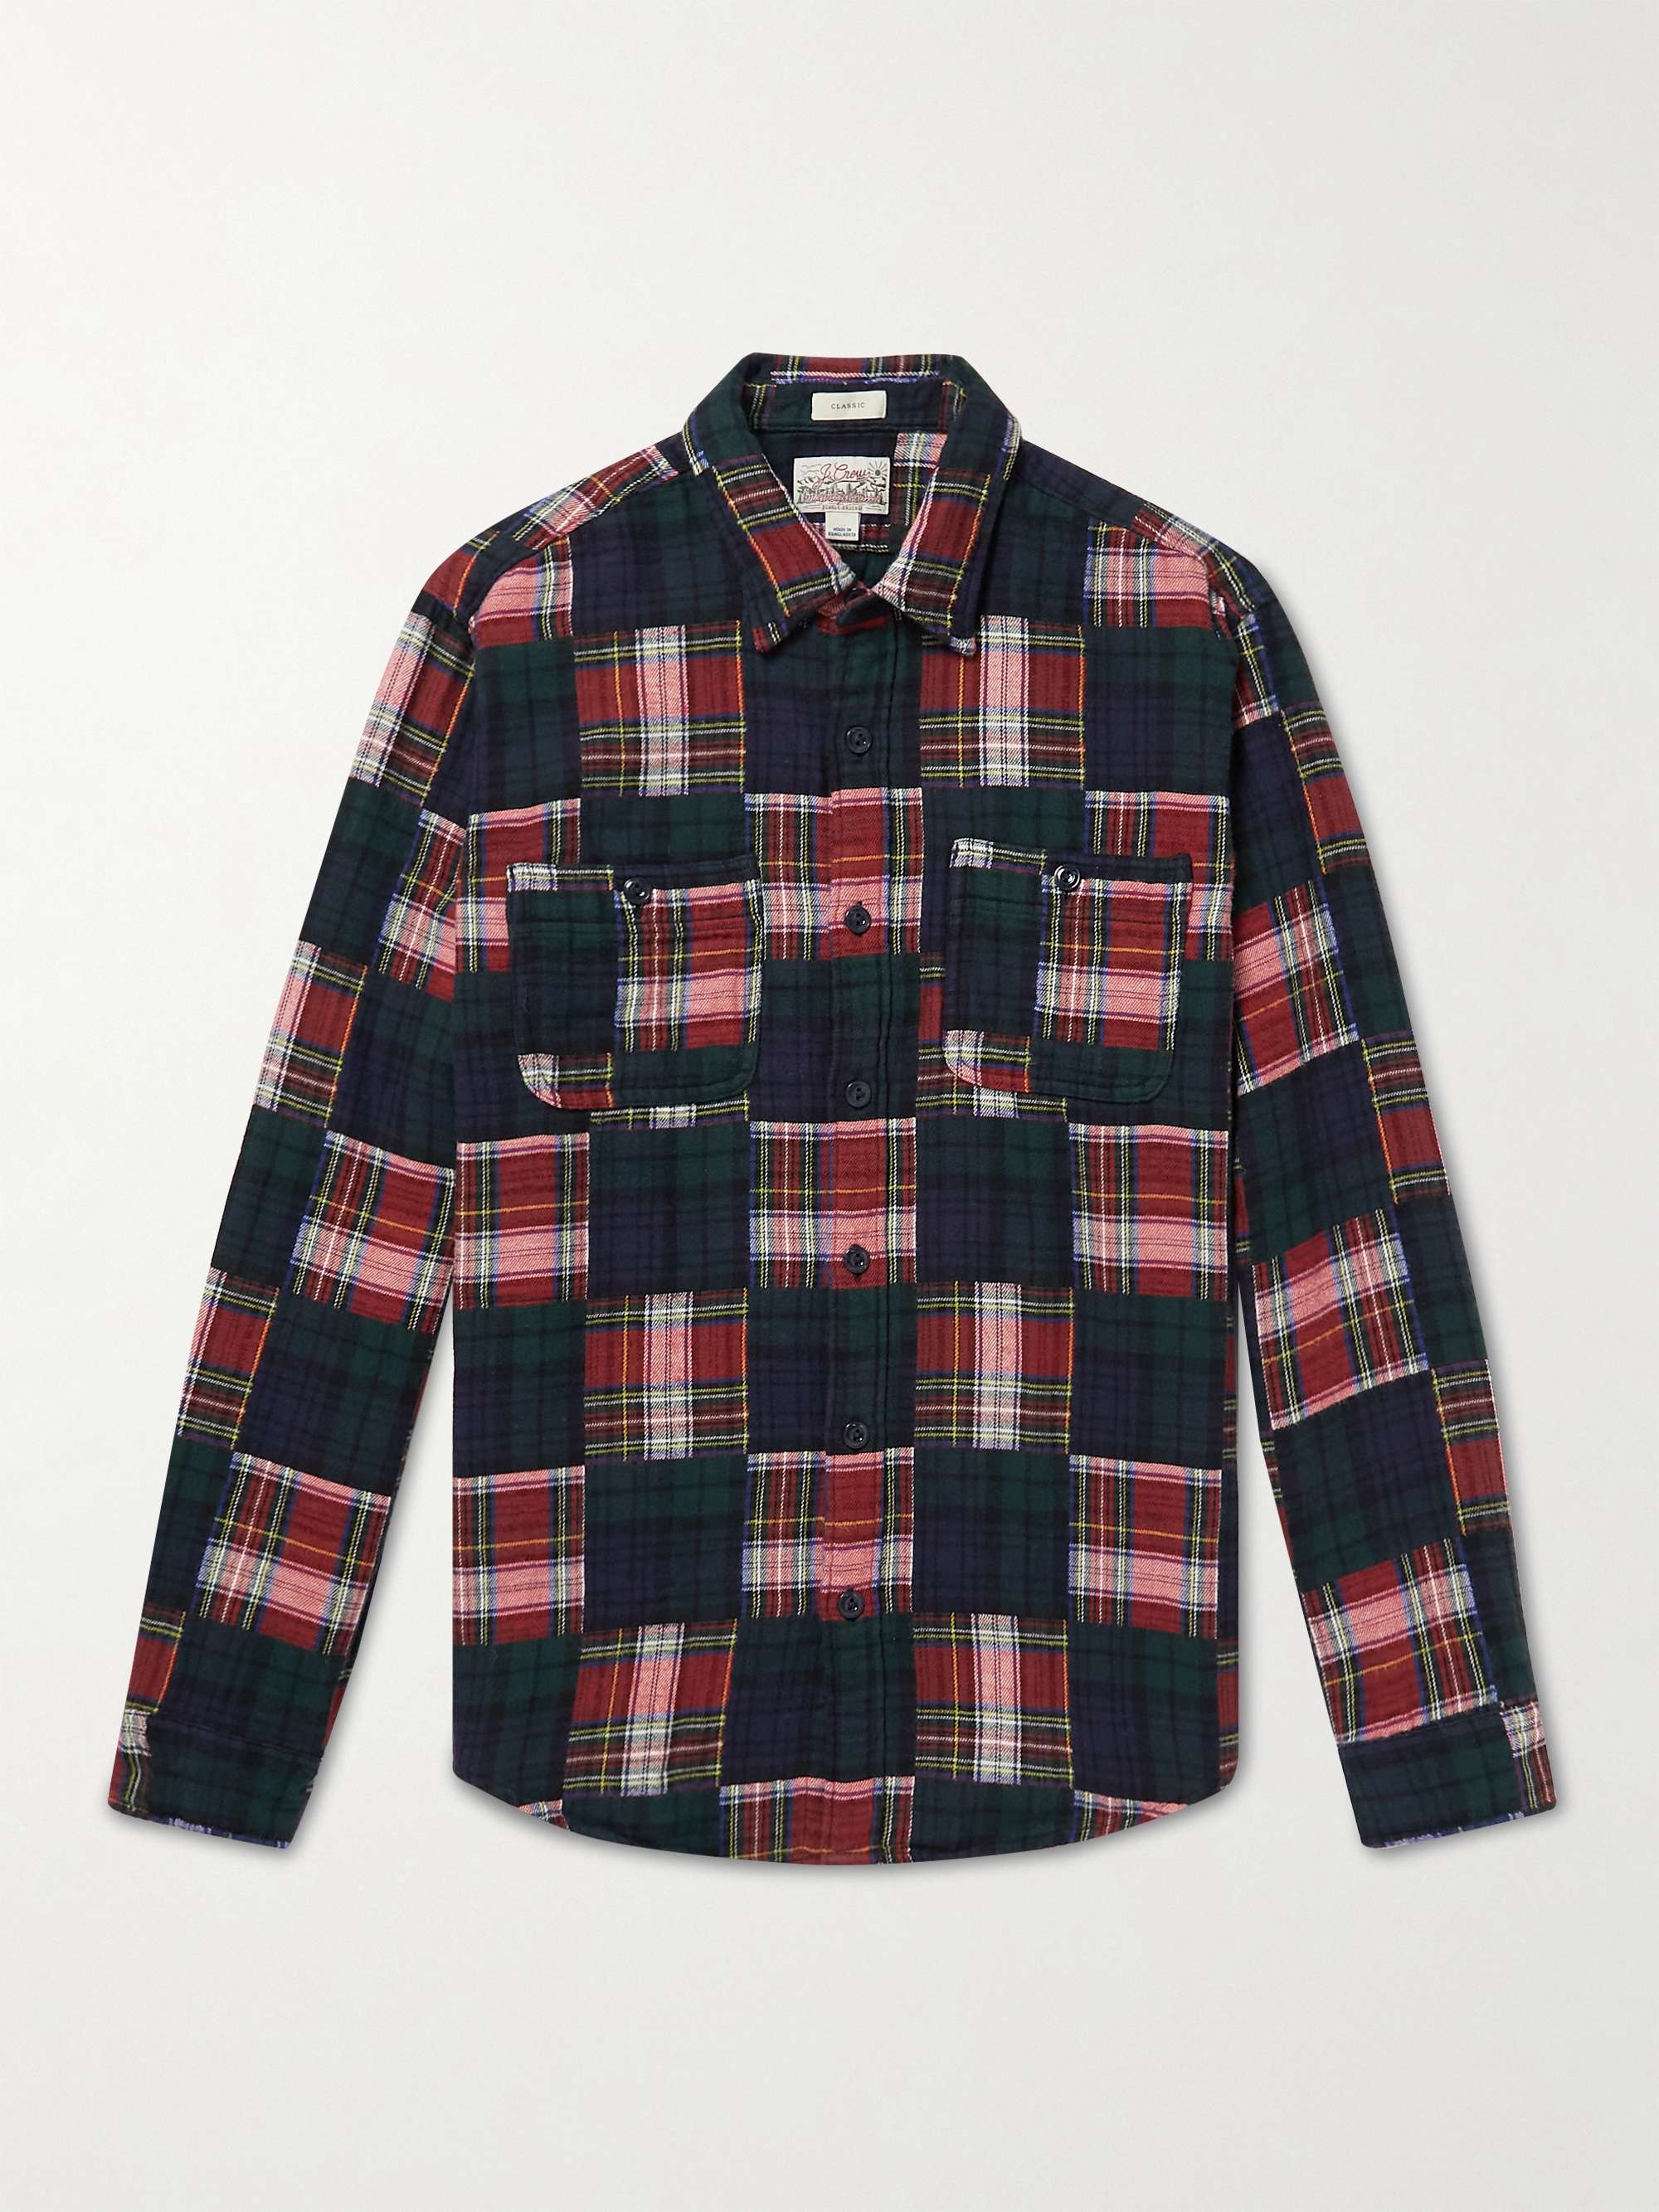 J.CREW Holiday Patchwork Cotton-Flannel Shirt